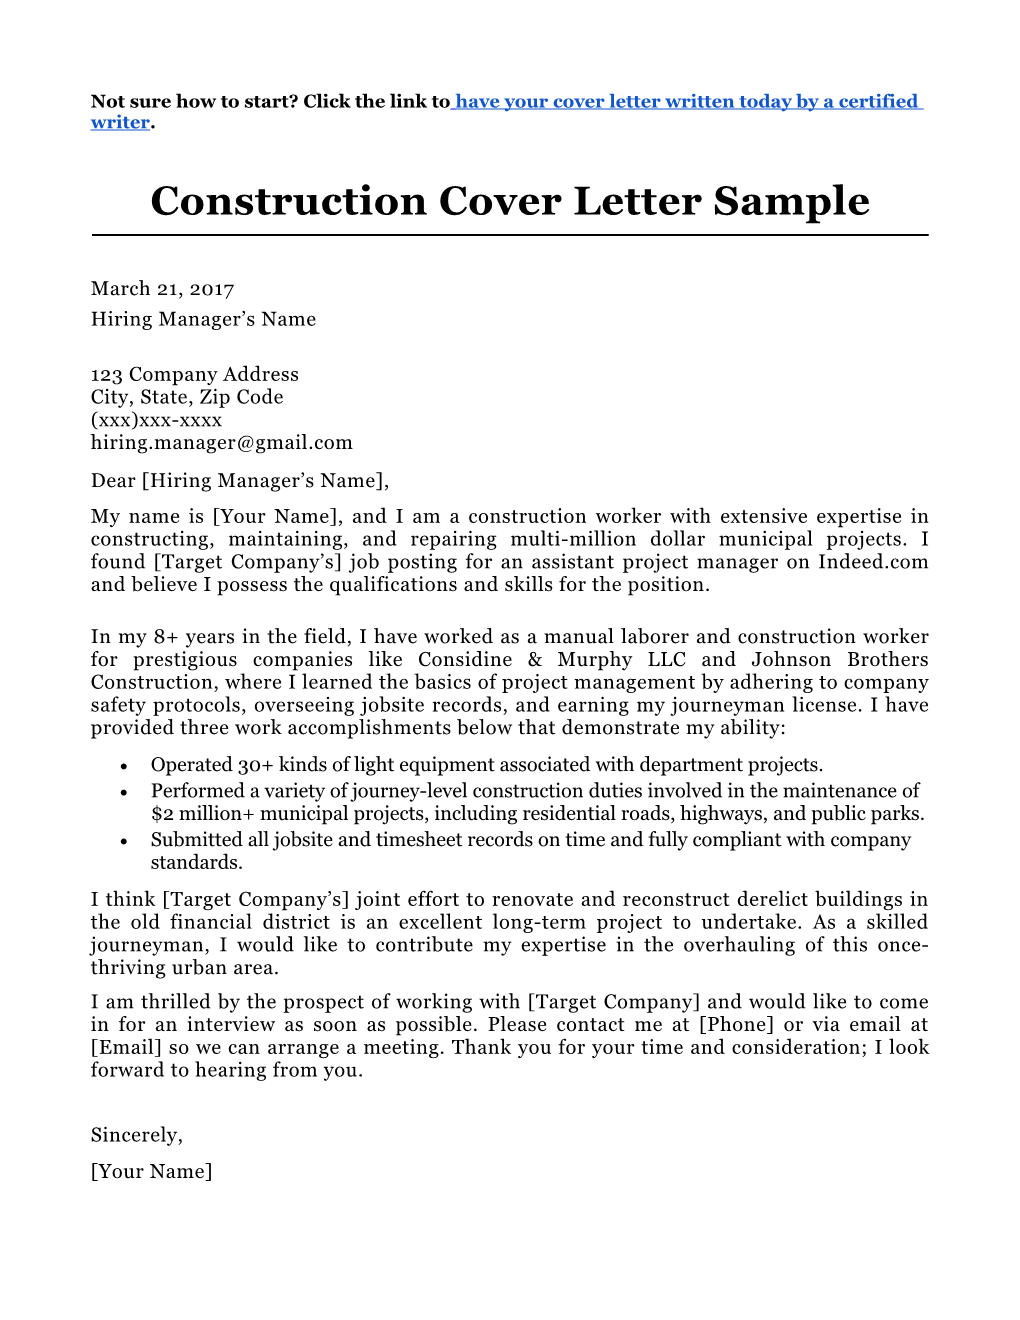 Construction Cover Letter Sample